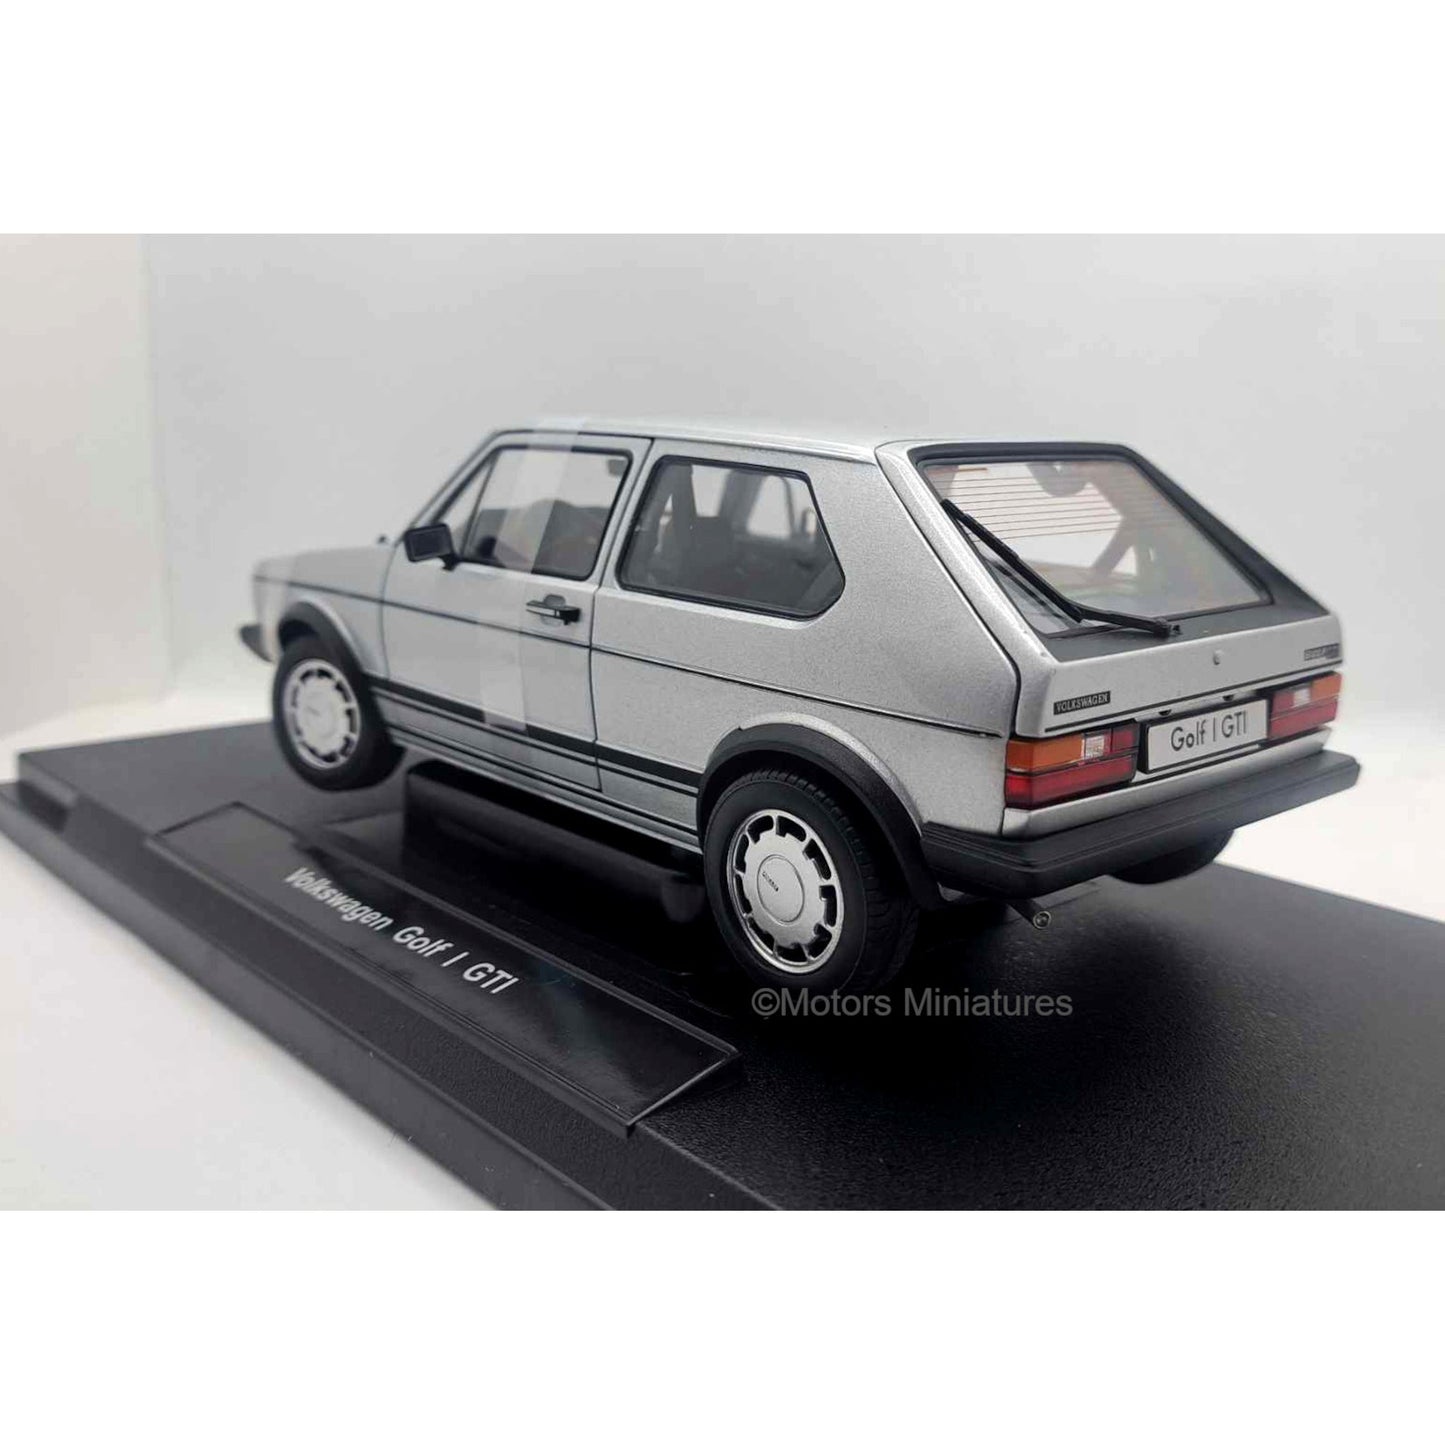 Volkswagen Golf I GTi Silver Welly 1/18 - welly18039s